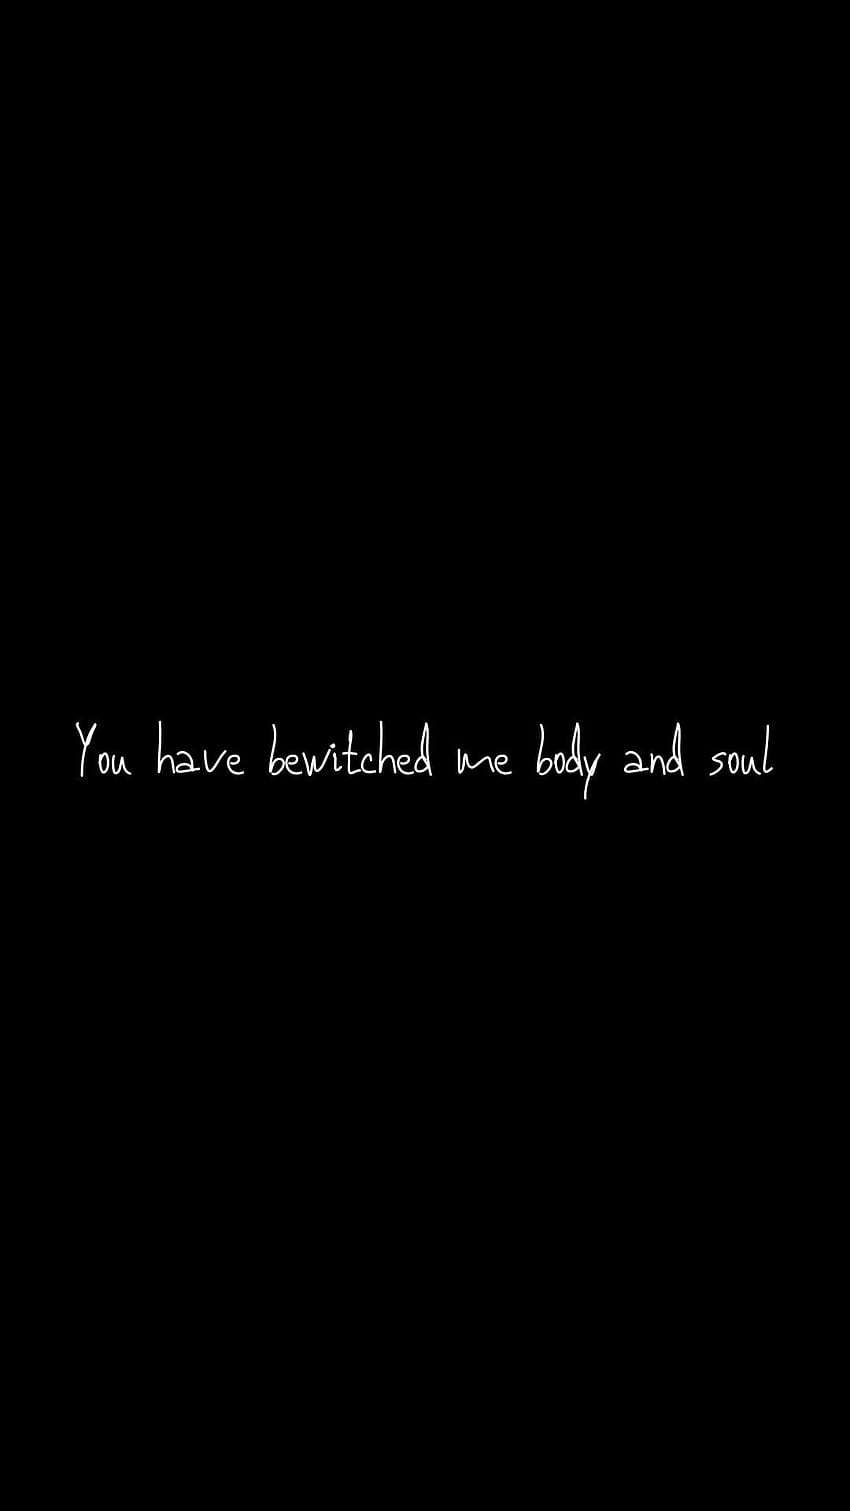 You have bewitched me body and soul - Pride and Prejudice HD phone wallpaper